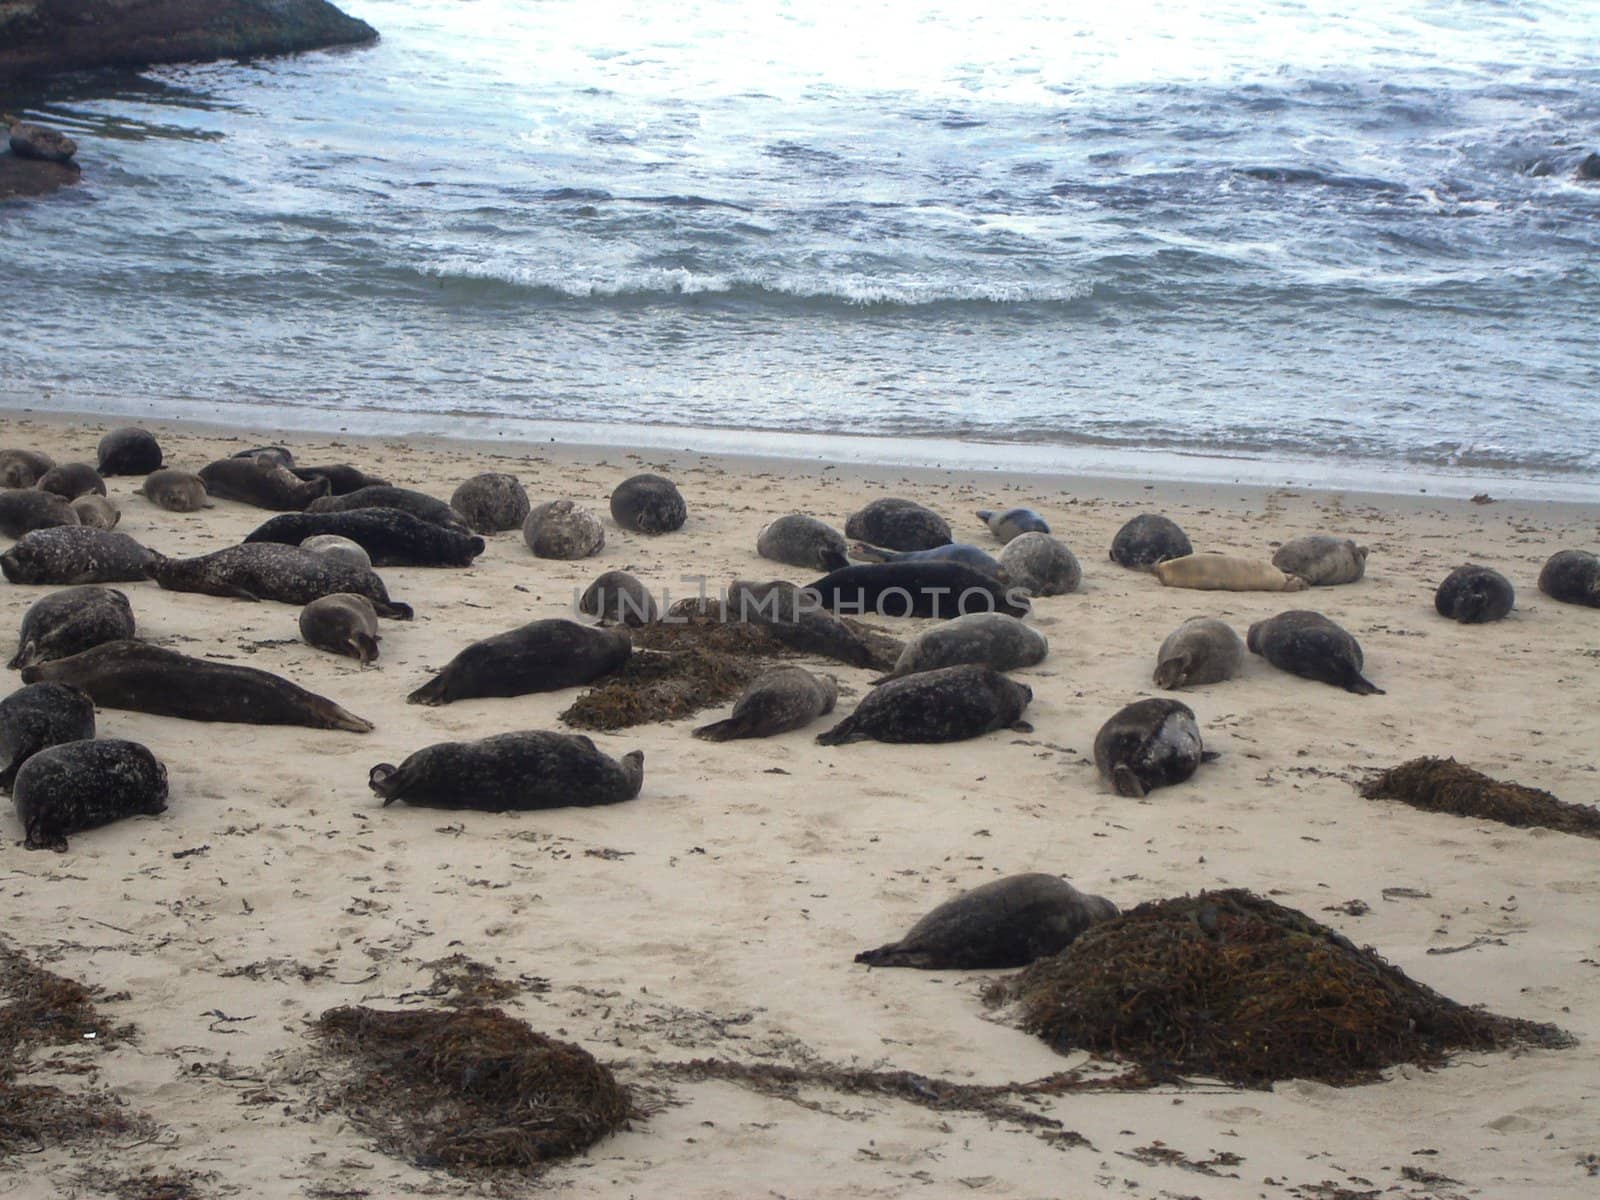 Seals on the beach by RefocusPhoto